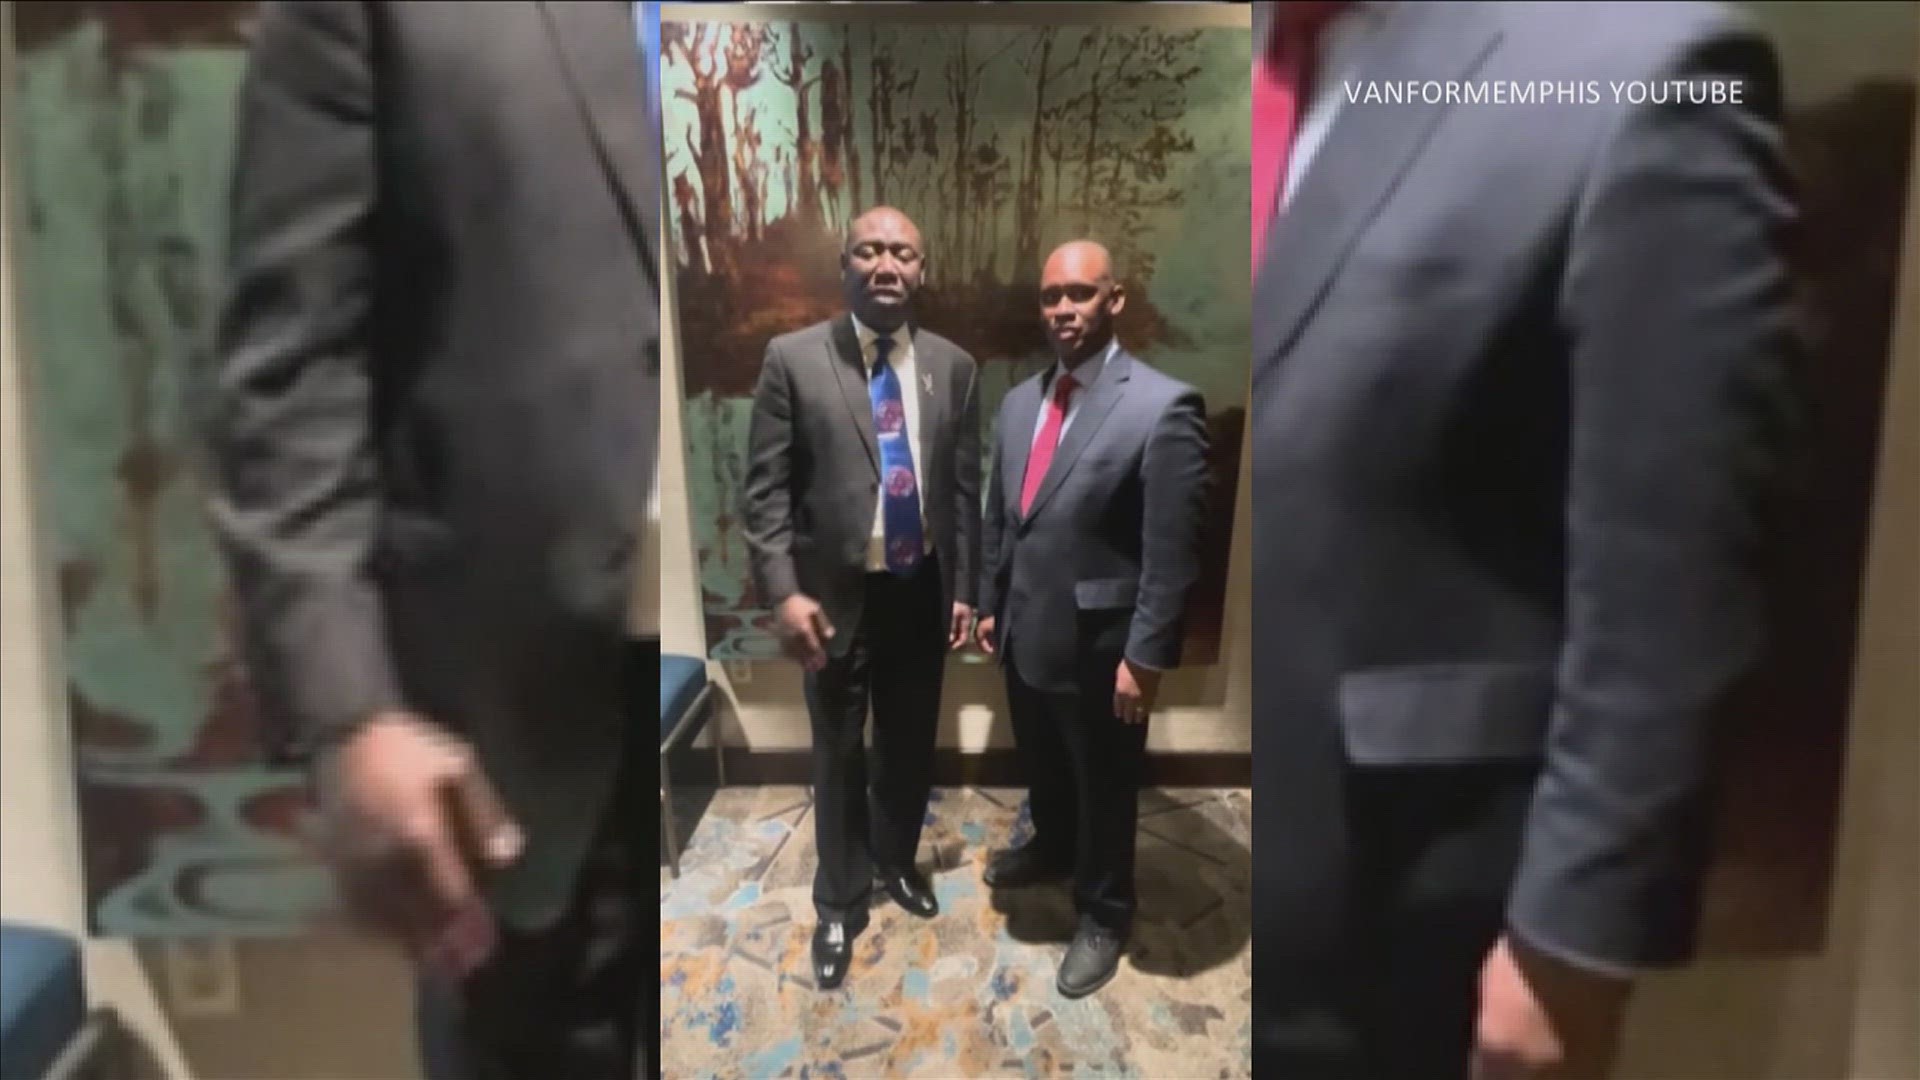 Crump posted a video talking about Turner's work as head of the Memphis chapter of the NAACP.